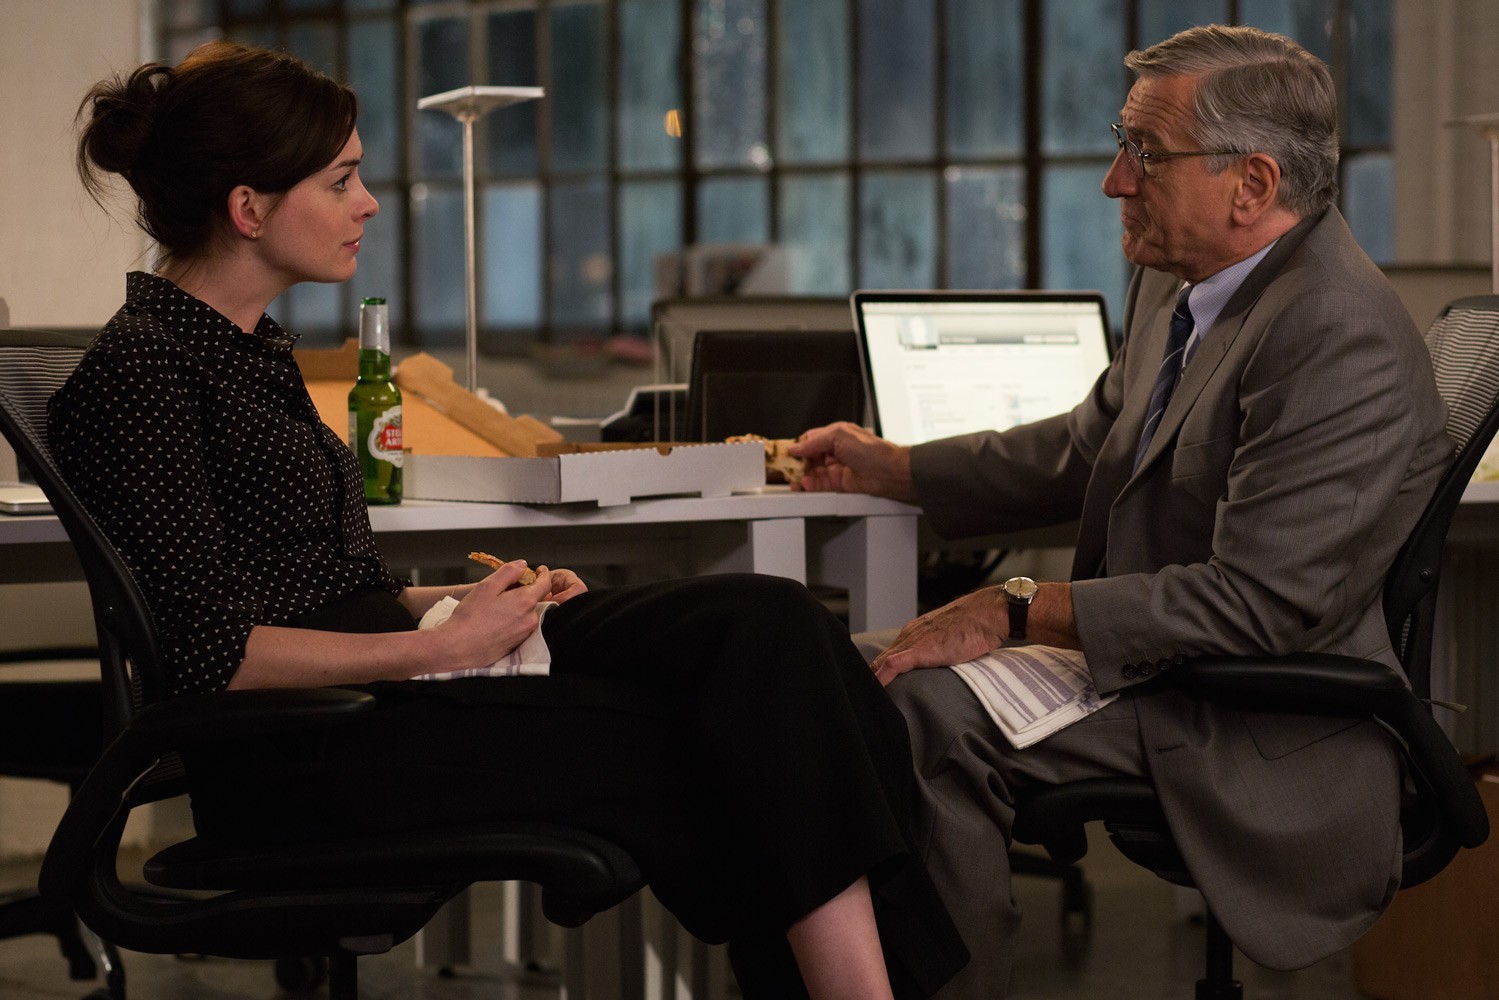 Anne Hathaway stars as Jules Ostin and Robert De Niro stars as Ben Whittaker in Warner Bros. Pictures' The Intern (2015). Photo credit by Francois Duhamel.